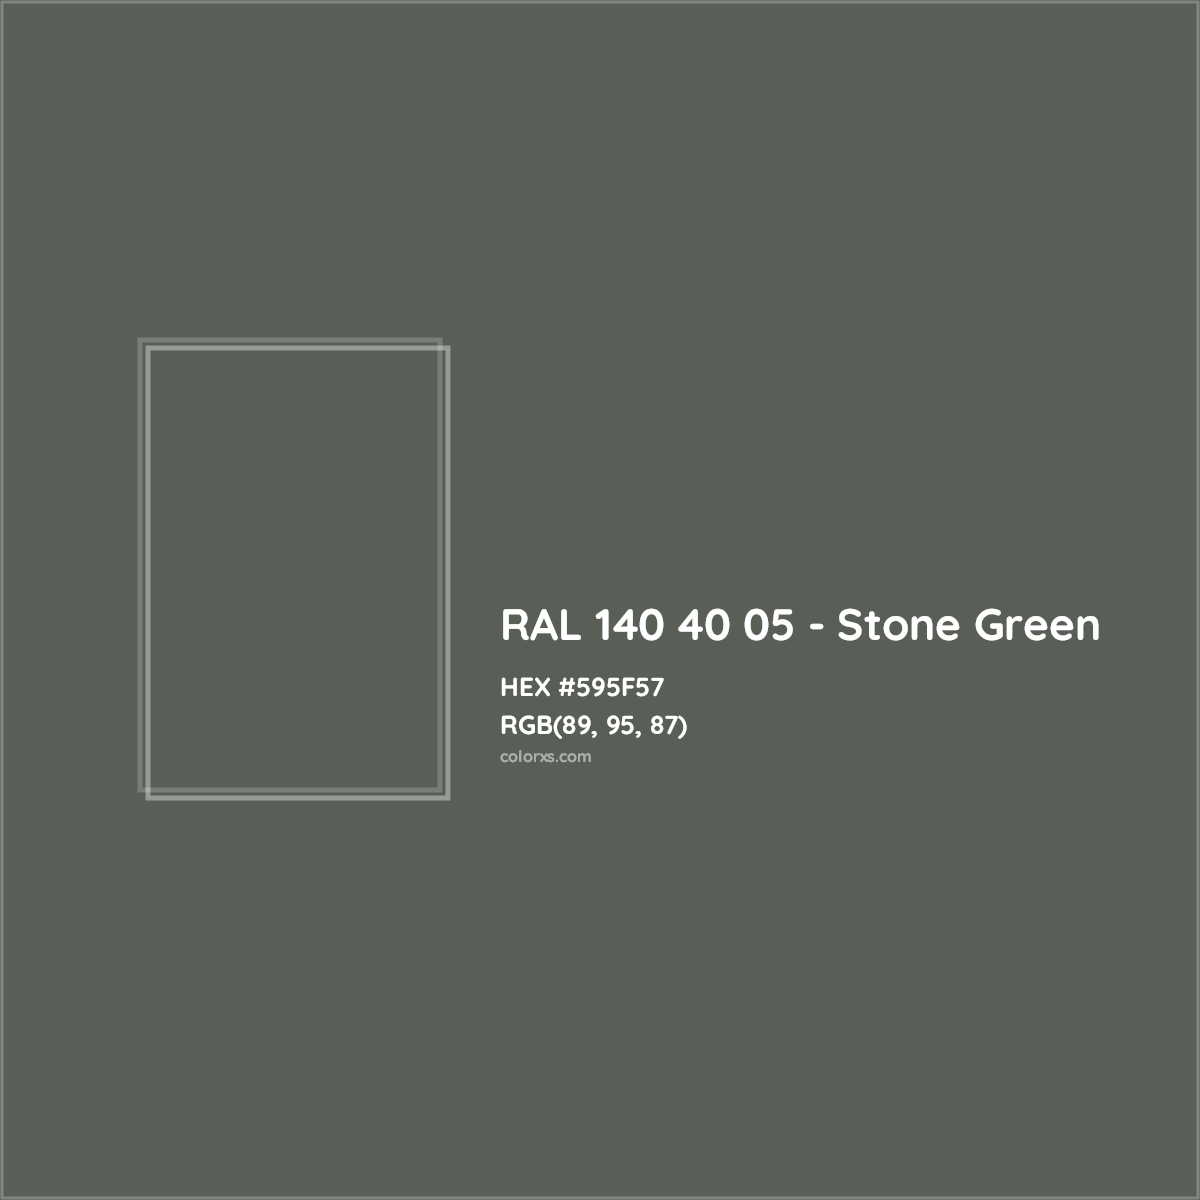 HEX #595F57 RAL 140 40 05 - Stone Green CMS RAL Design - Color Code